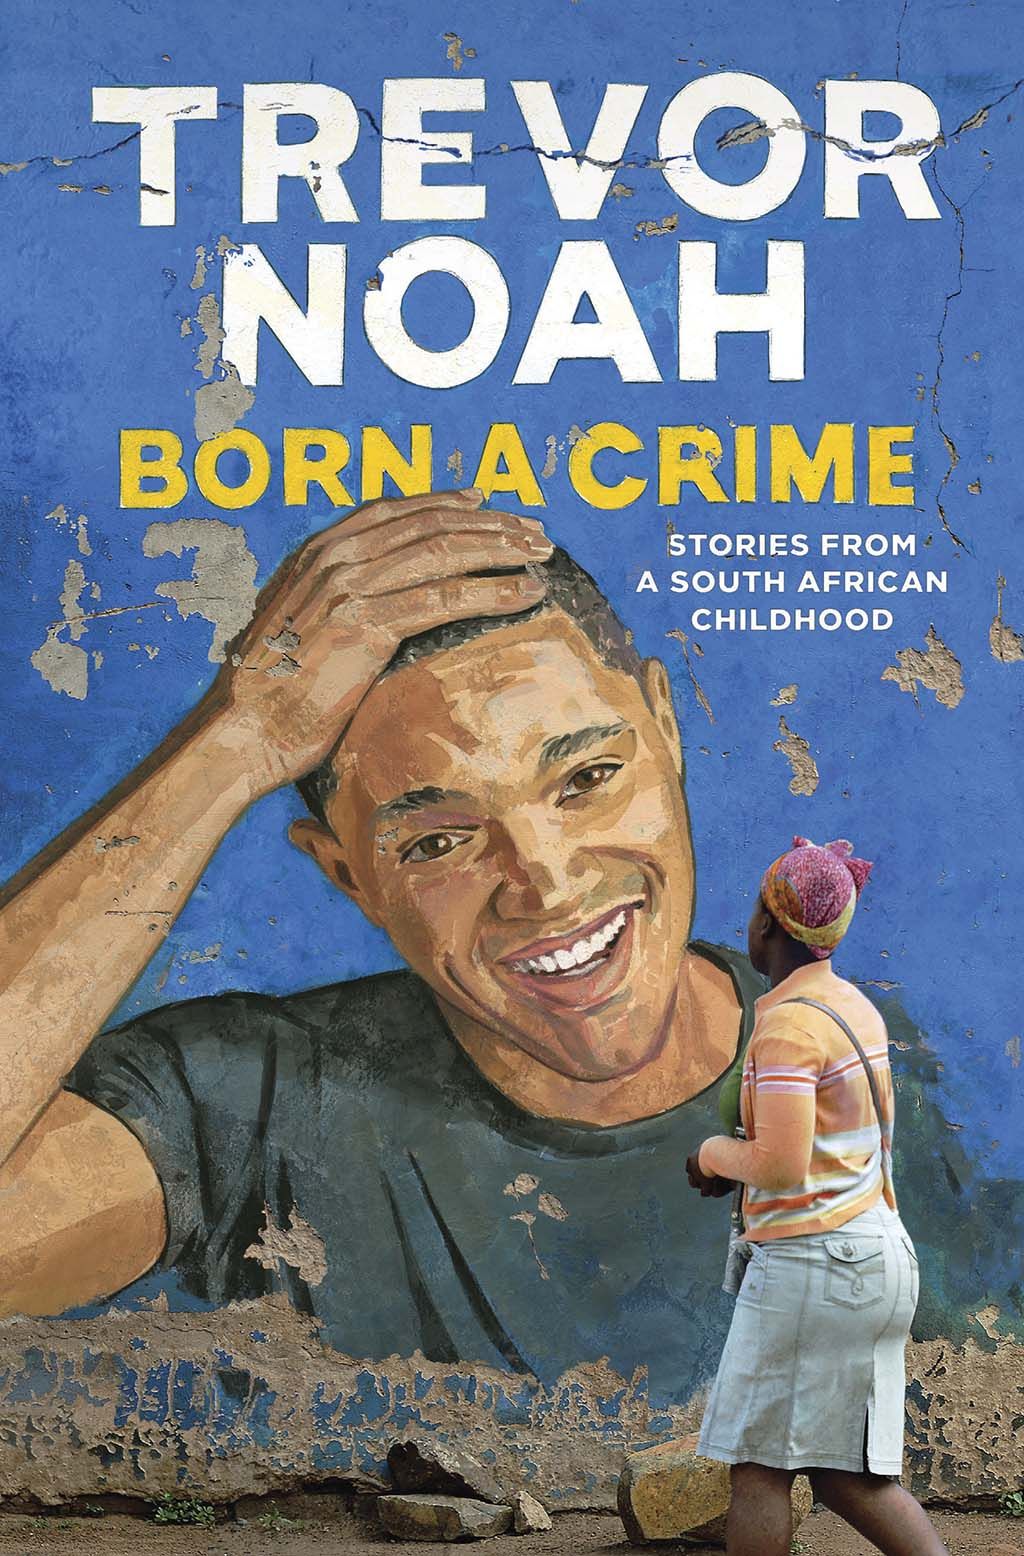 trevor-noah-book-born-a-crime-stories-from-a-south-african-childhood